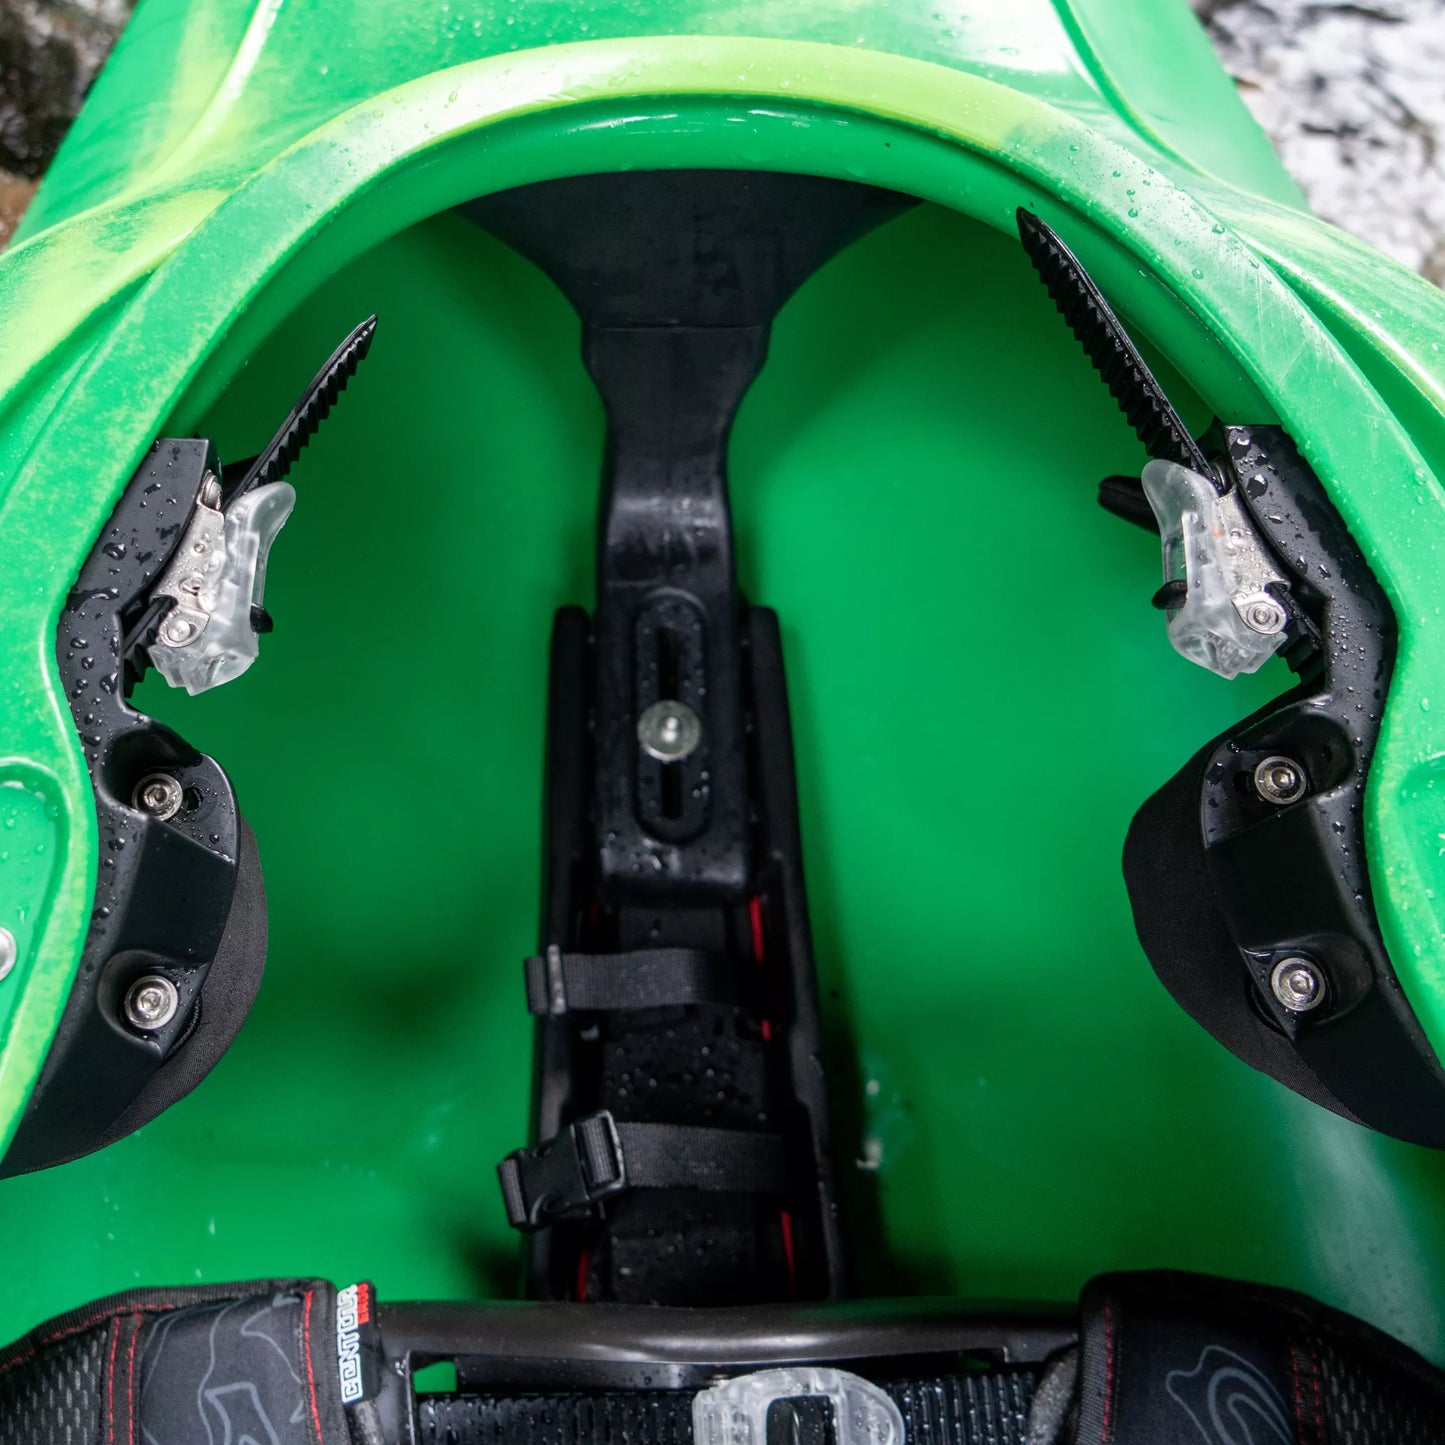 A close up of a green Dagger Rewind whitewater kayak with a black seat.